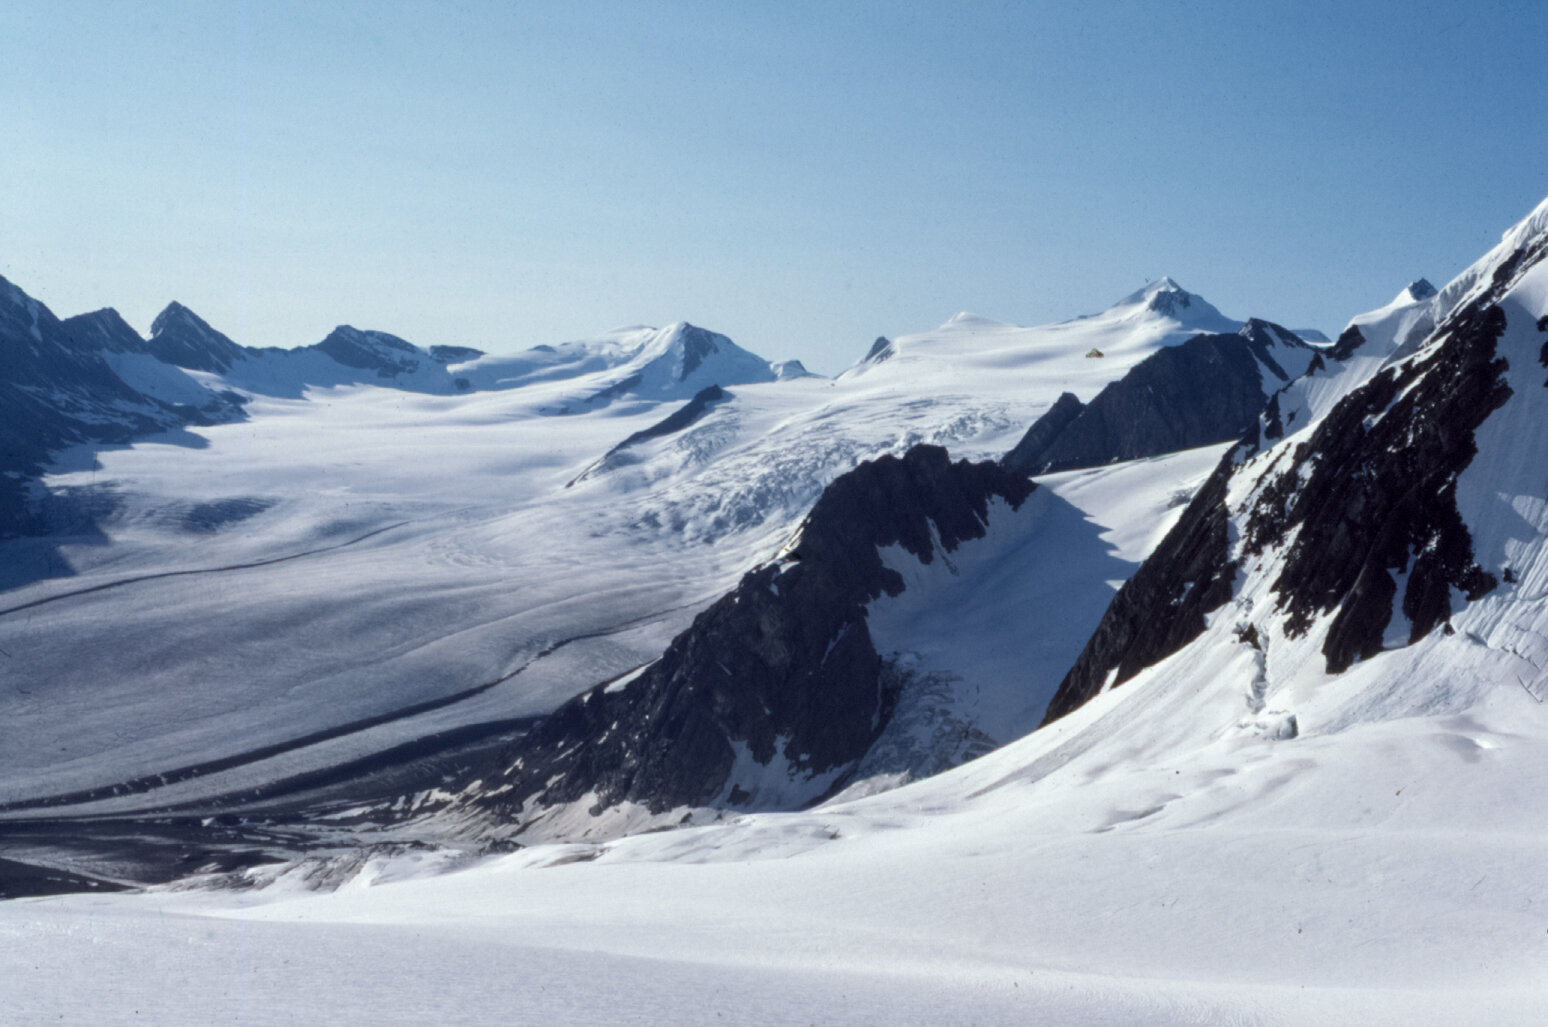  In the distant centre is Barlow and to its right “Barlow West” and then “Barlow Far West,” on Barlow’s immediate left is Mt. Low and the pointed peak to the left is Mt. Whiteaves. 